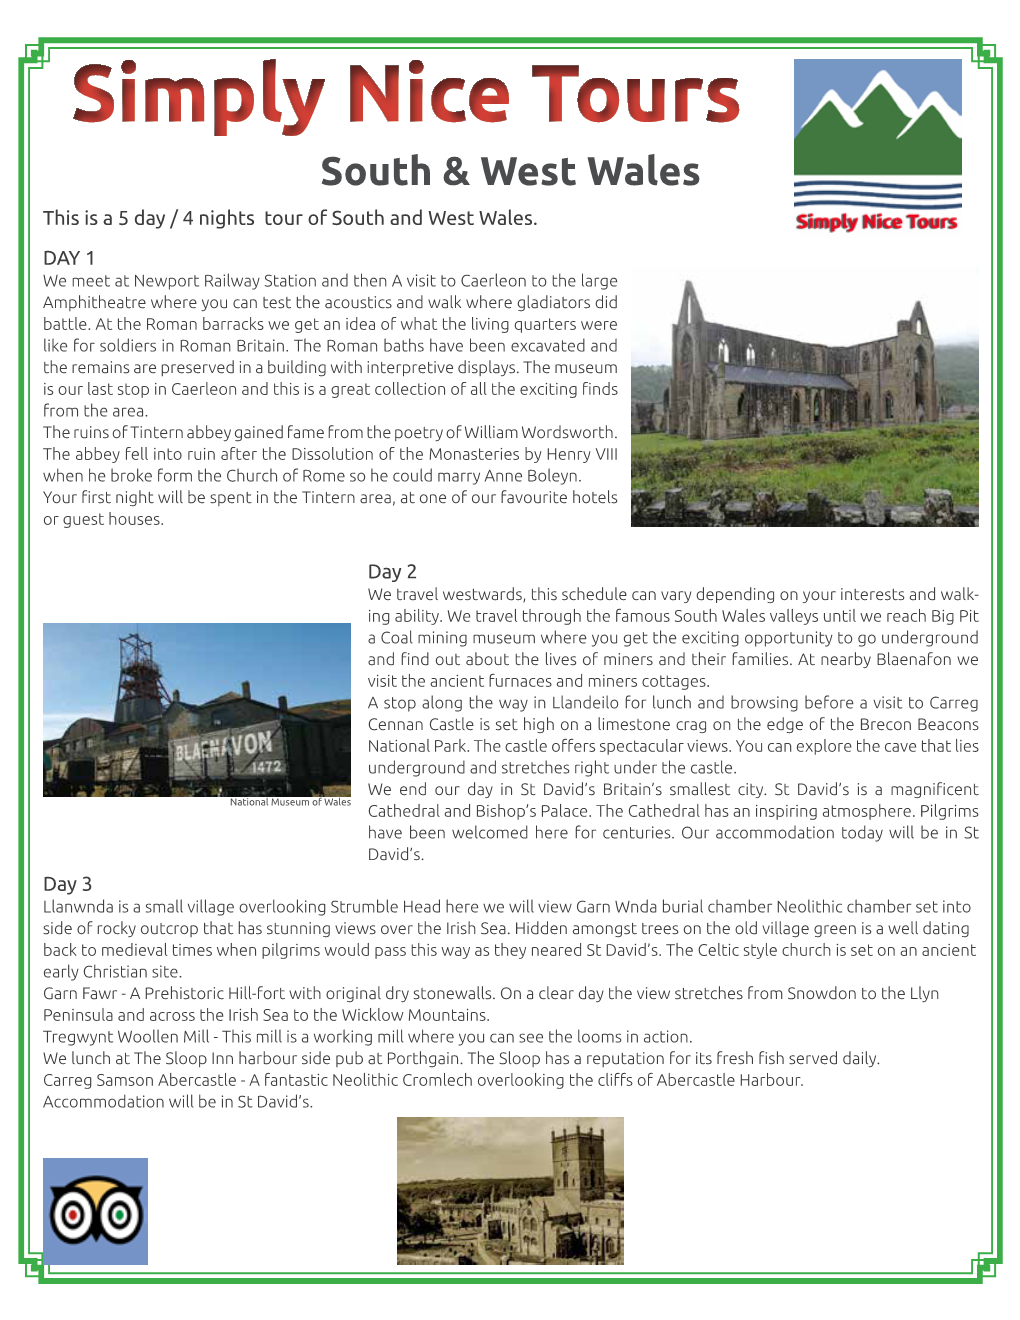 South & West Wales